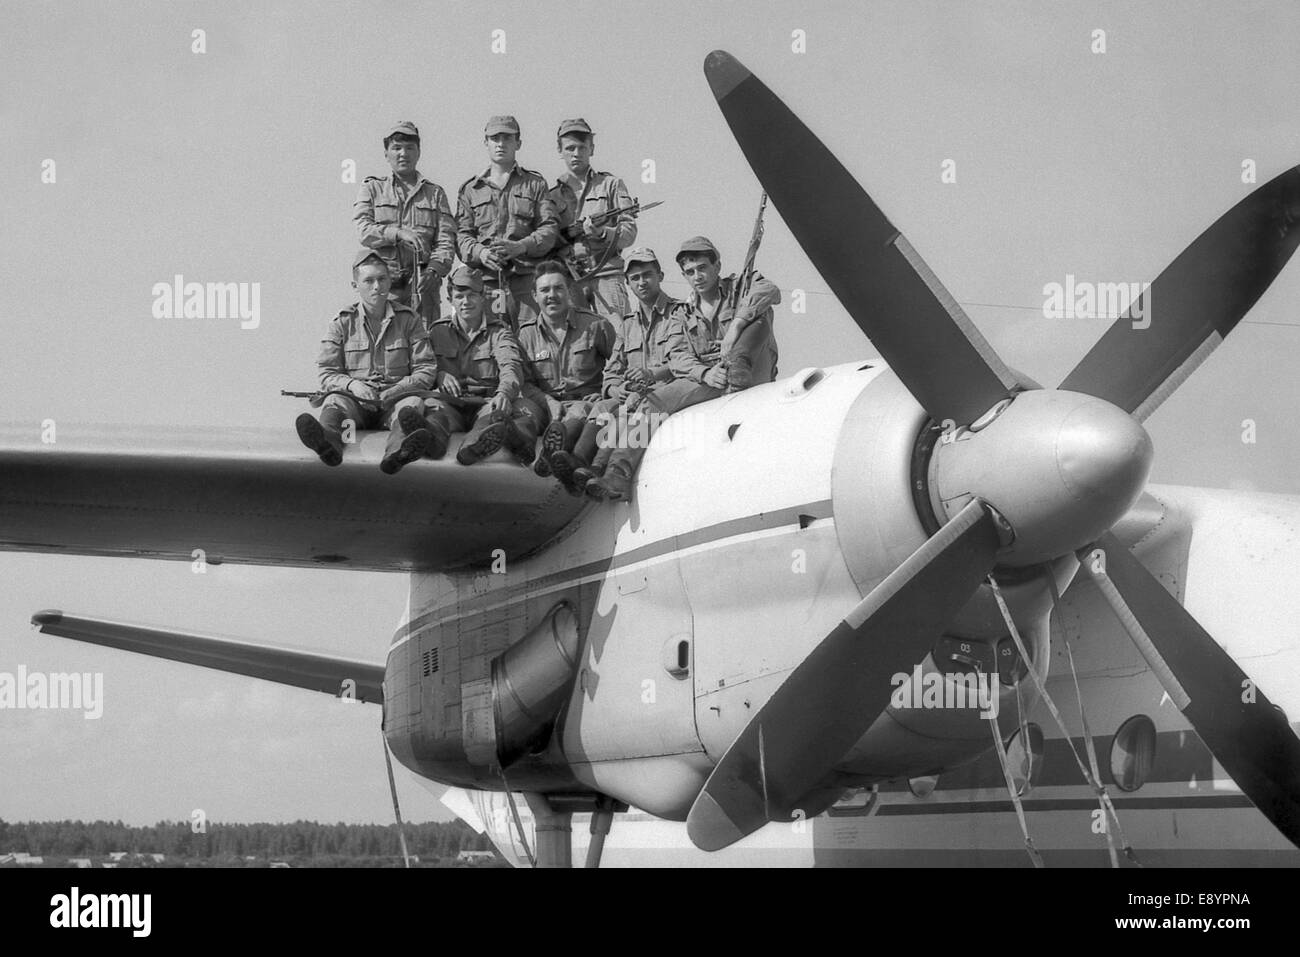 A group of soldiers standing on the wing of a military transport aircraft AN-24. Film scan. Stock Photo